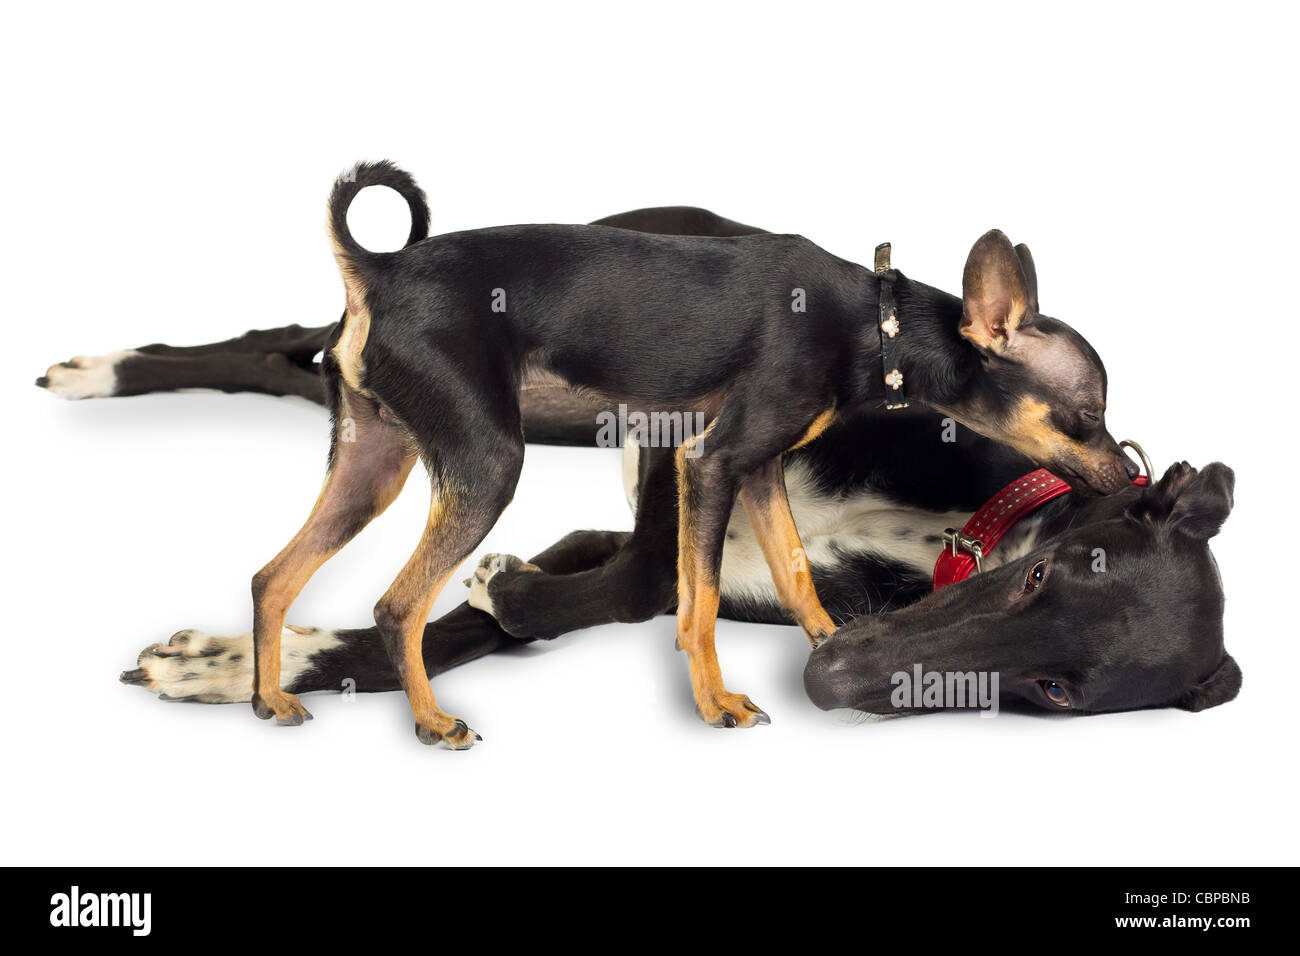 Two dogs - Toy dog and Greyhound, in the studio on a white background Stock Photo